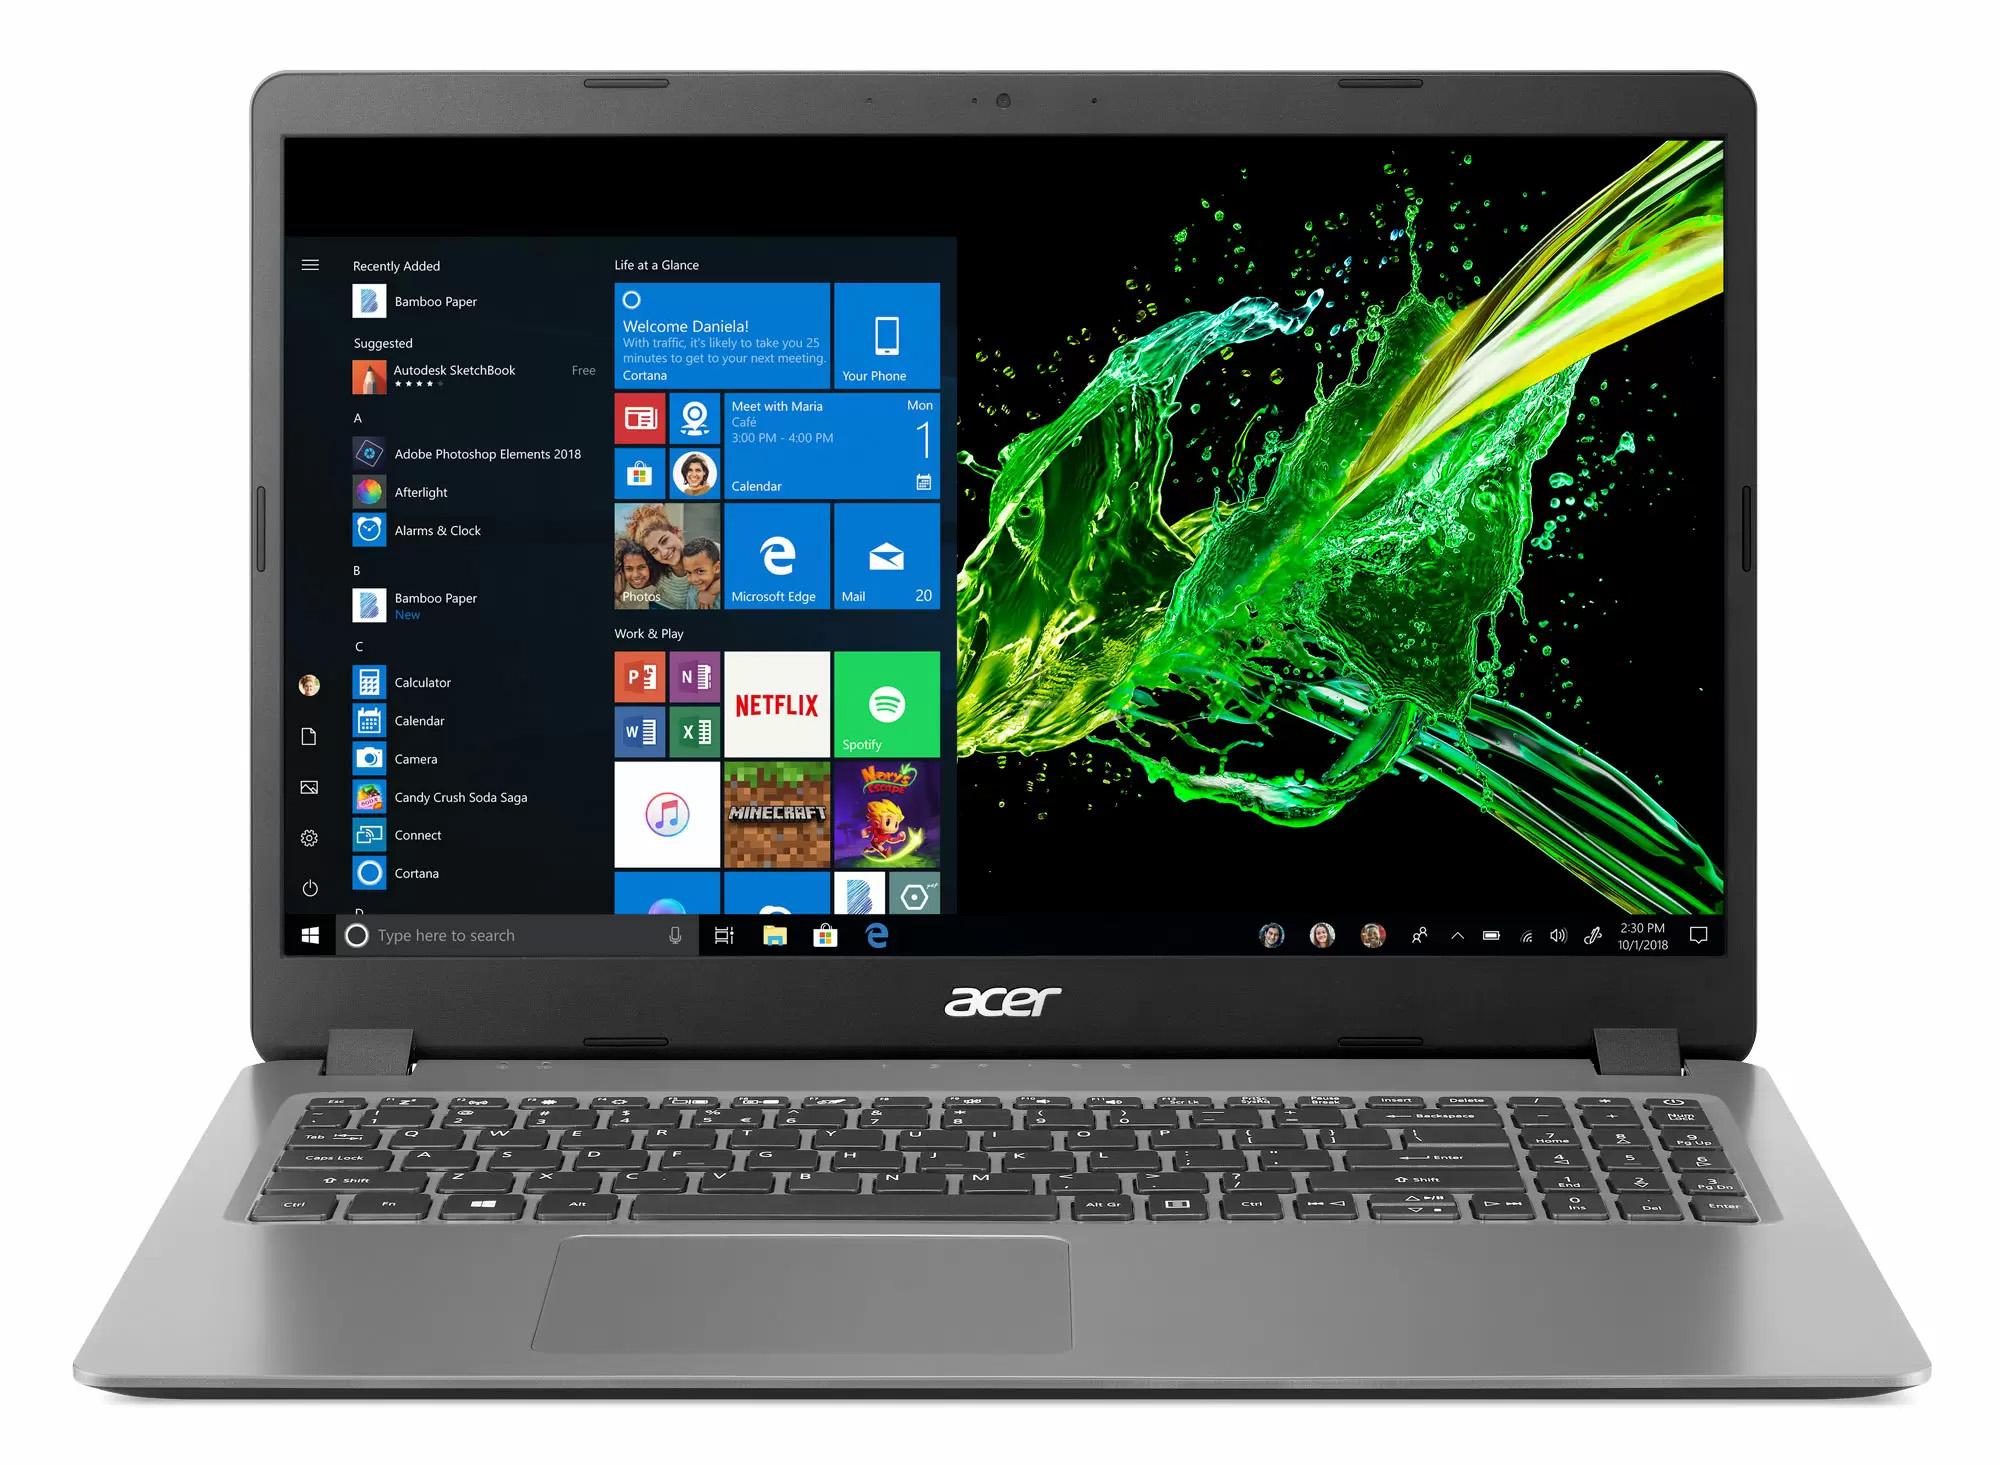 Acer Aspire 3 15.6in i5 8GB Notebook Laptop for $349 Shipped